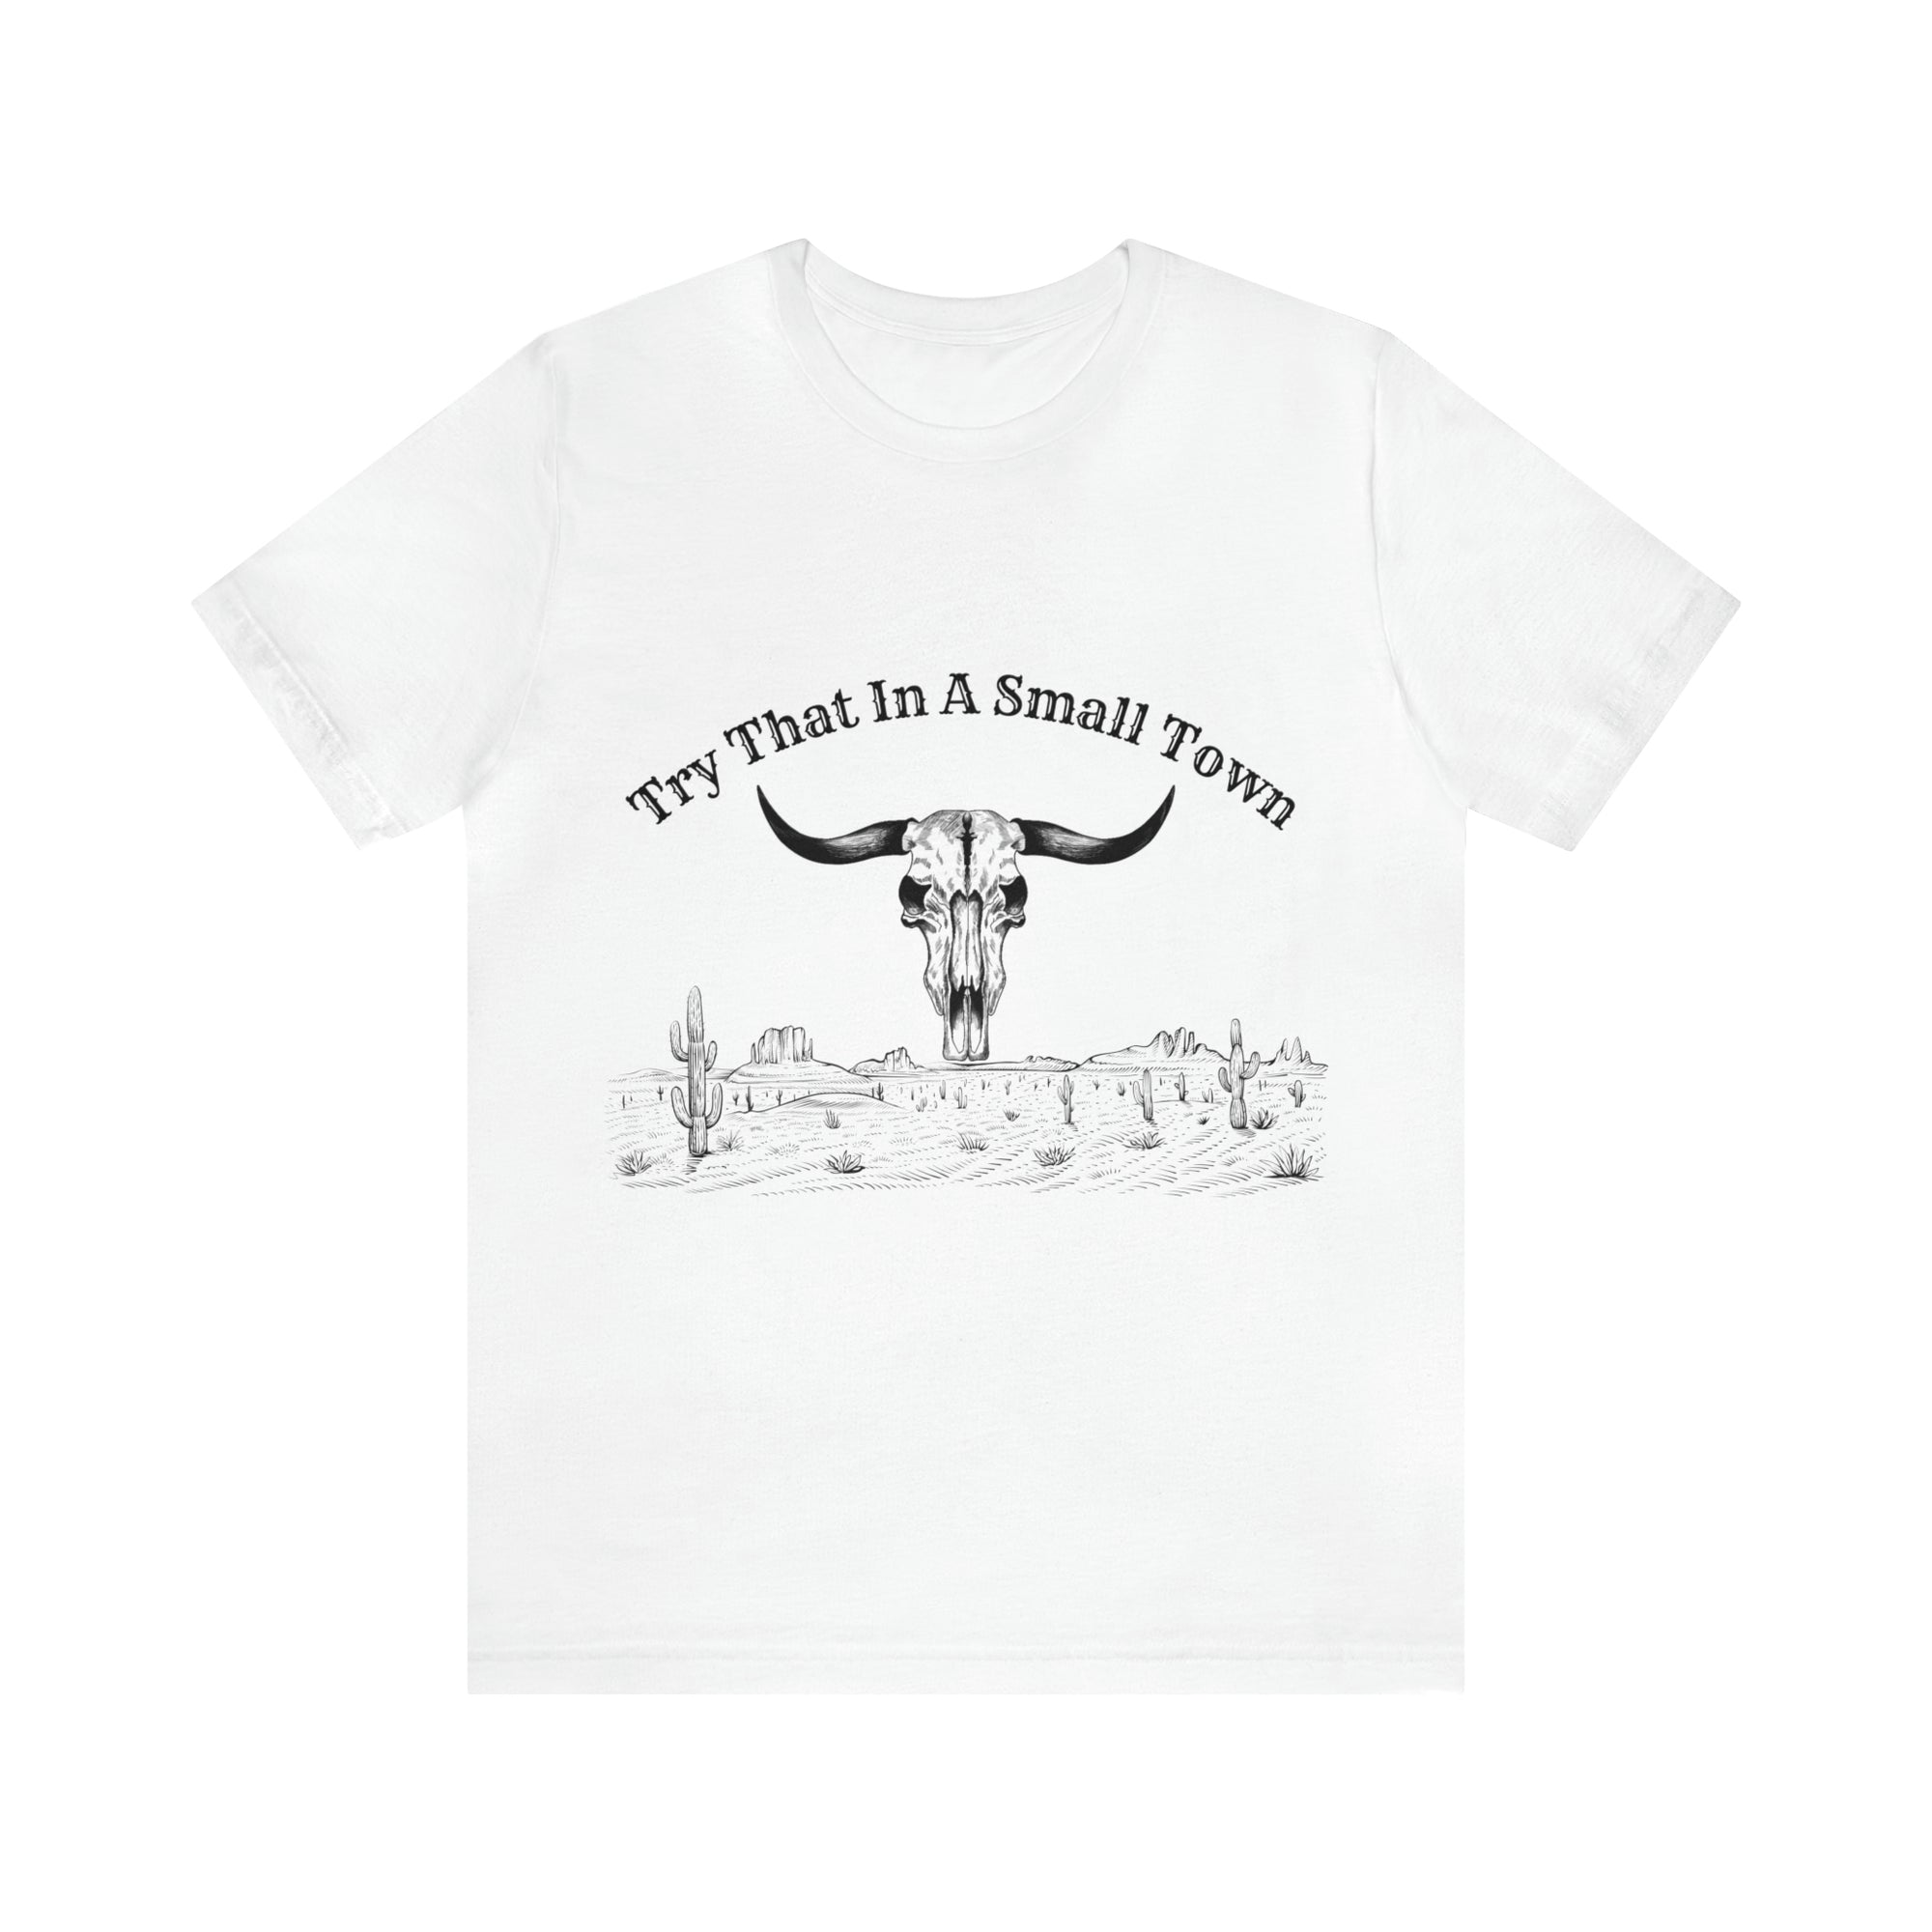 Try That In A Small Town - Unisex Jersey Short Sleeve Tee